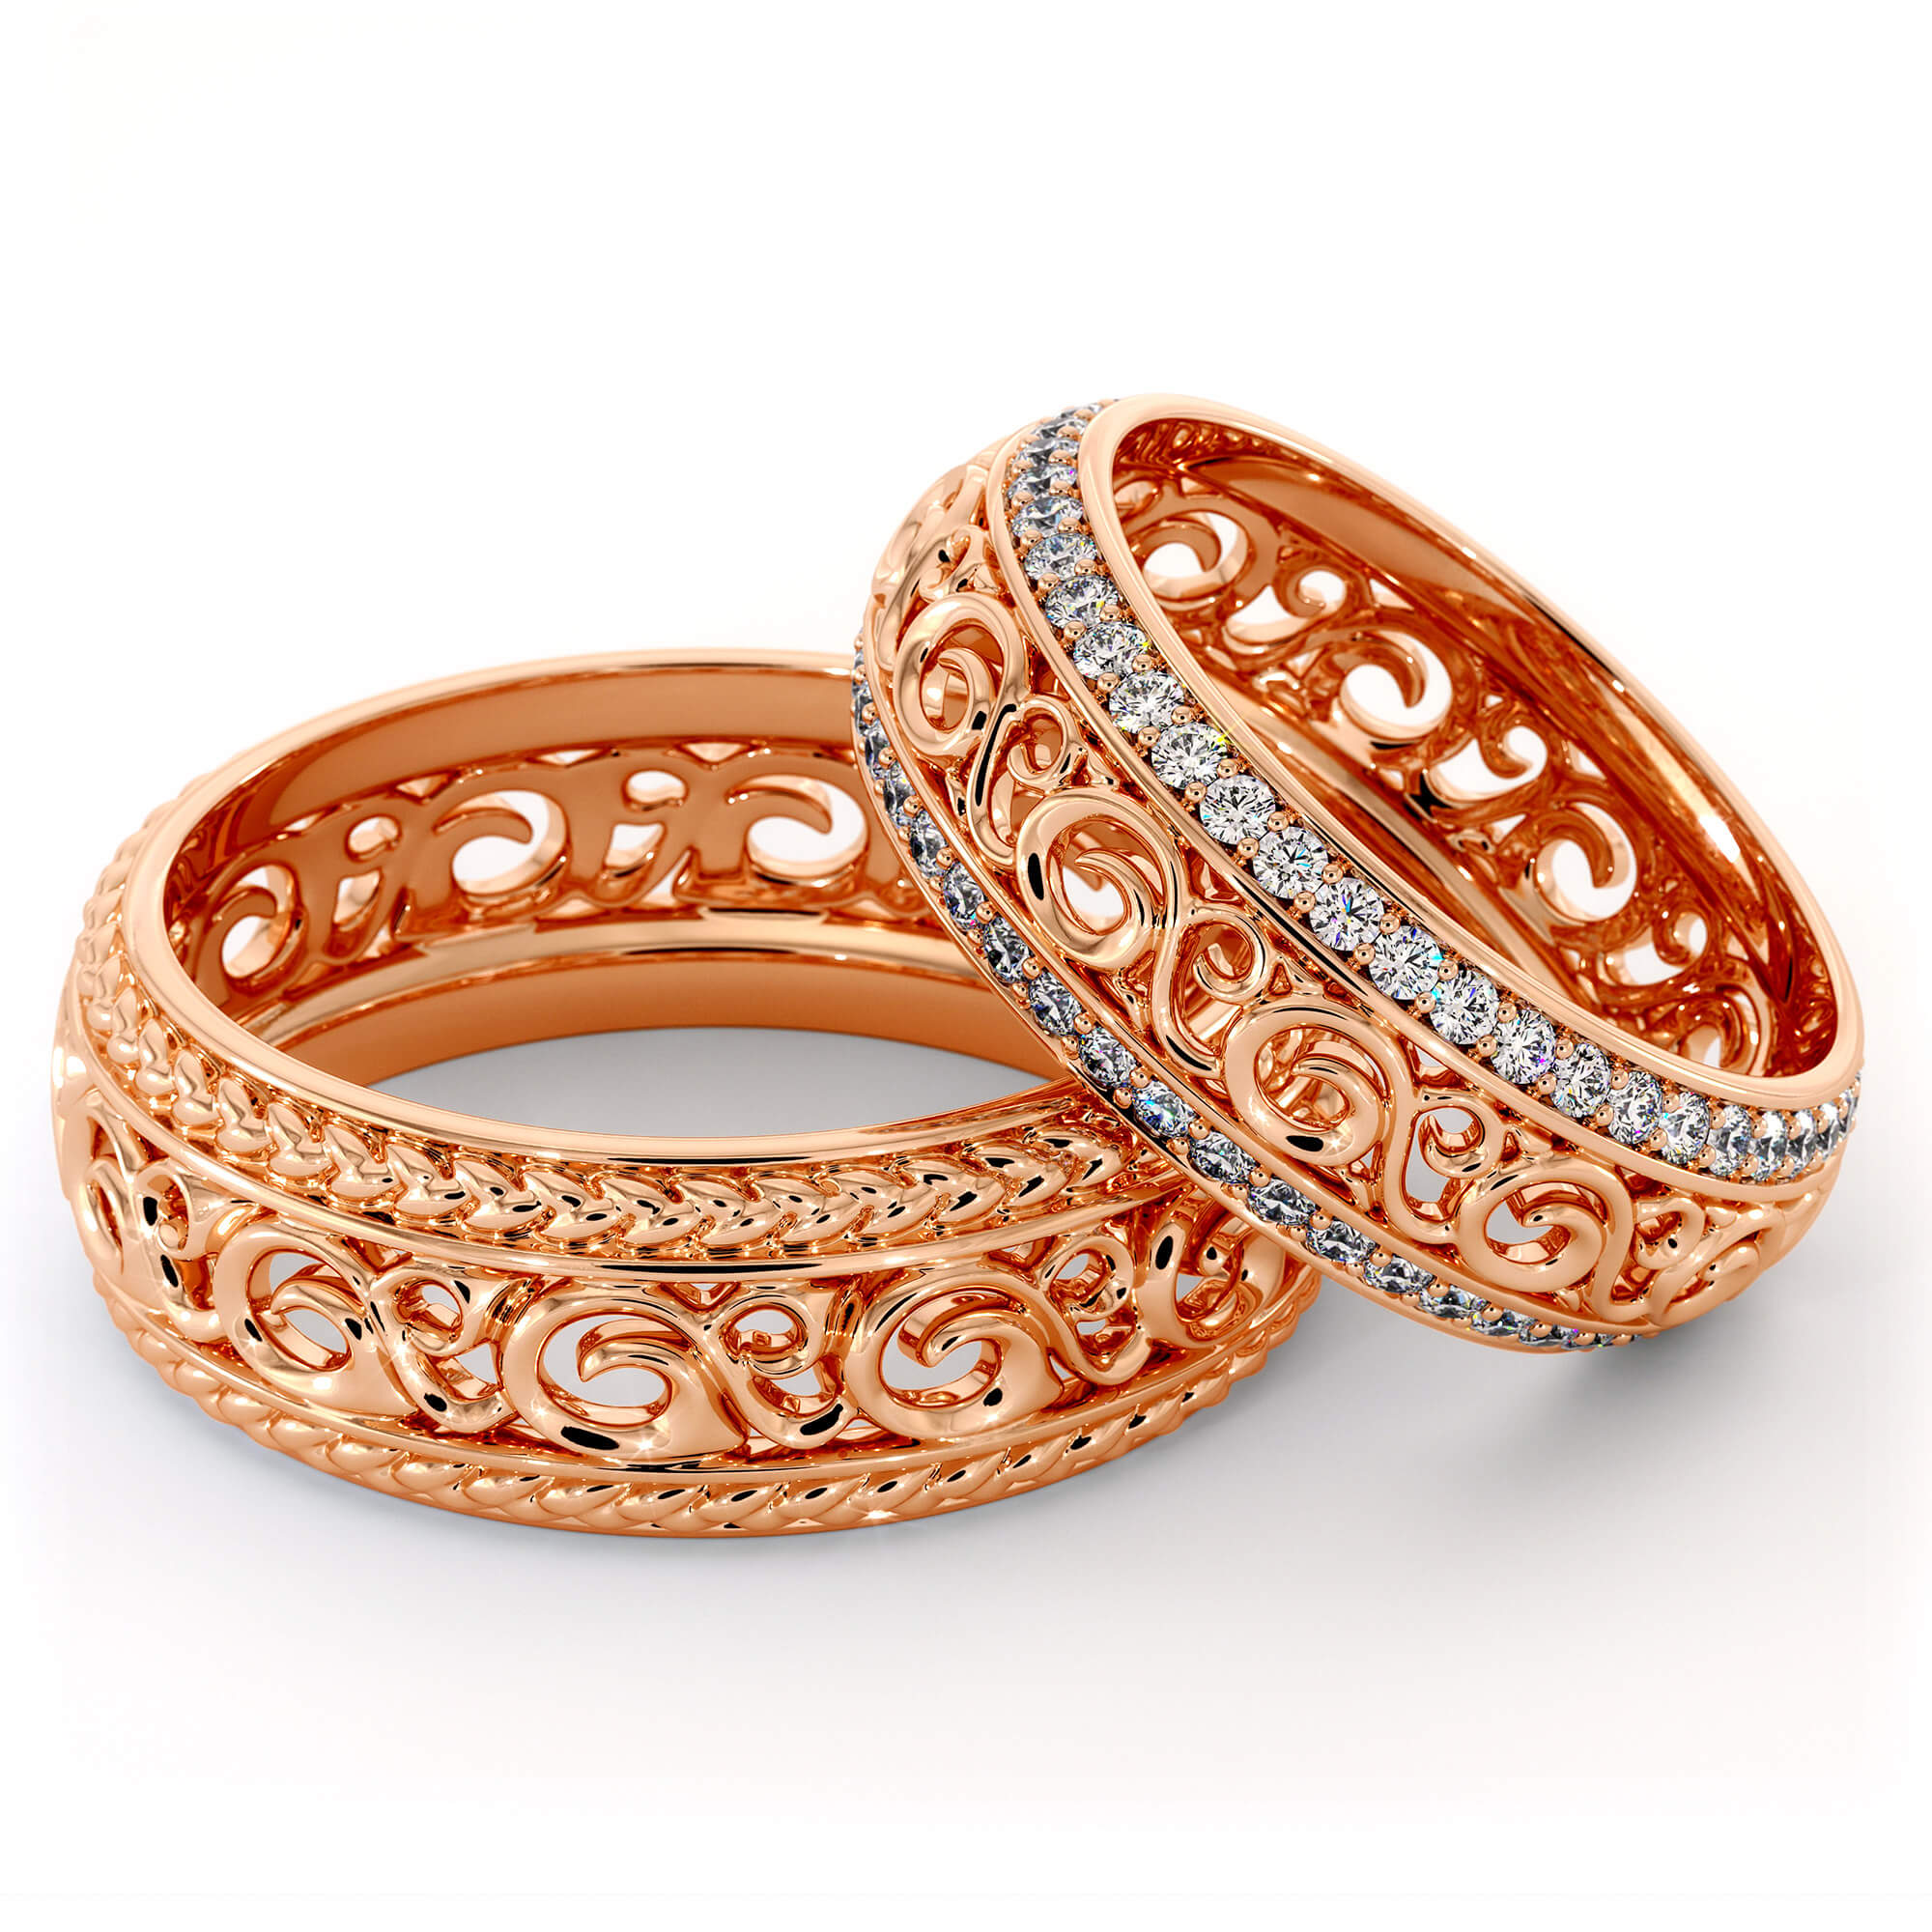  Wedding  Band  His And Hers Set 14K Rose  Gold  Wedding  Rings  